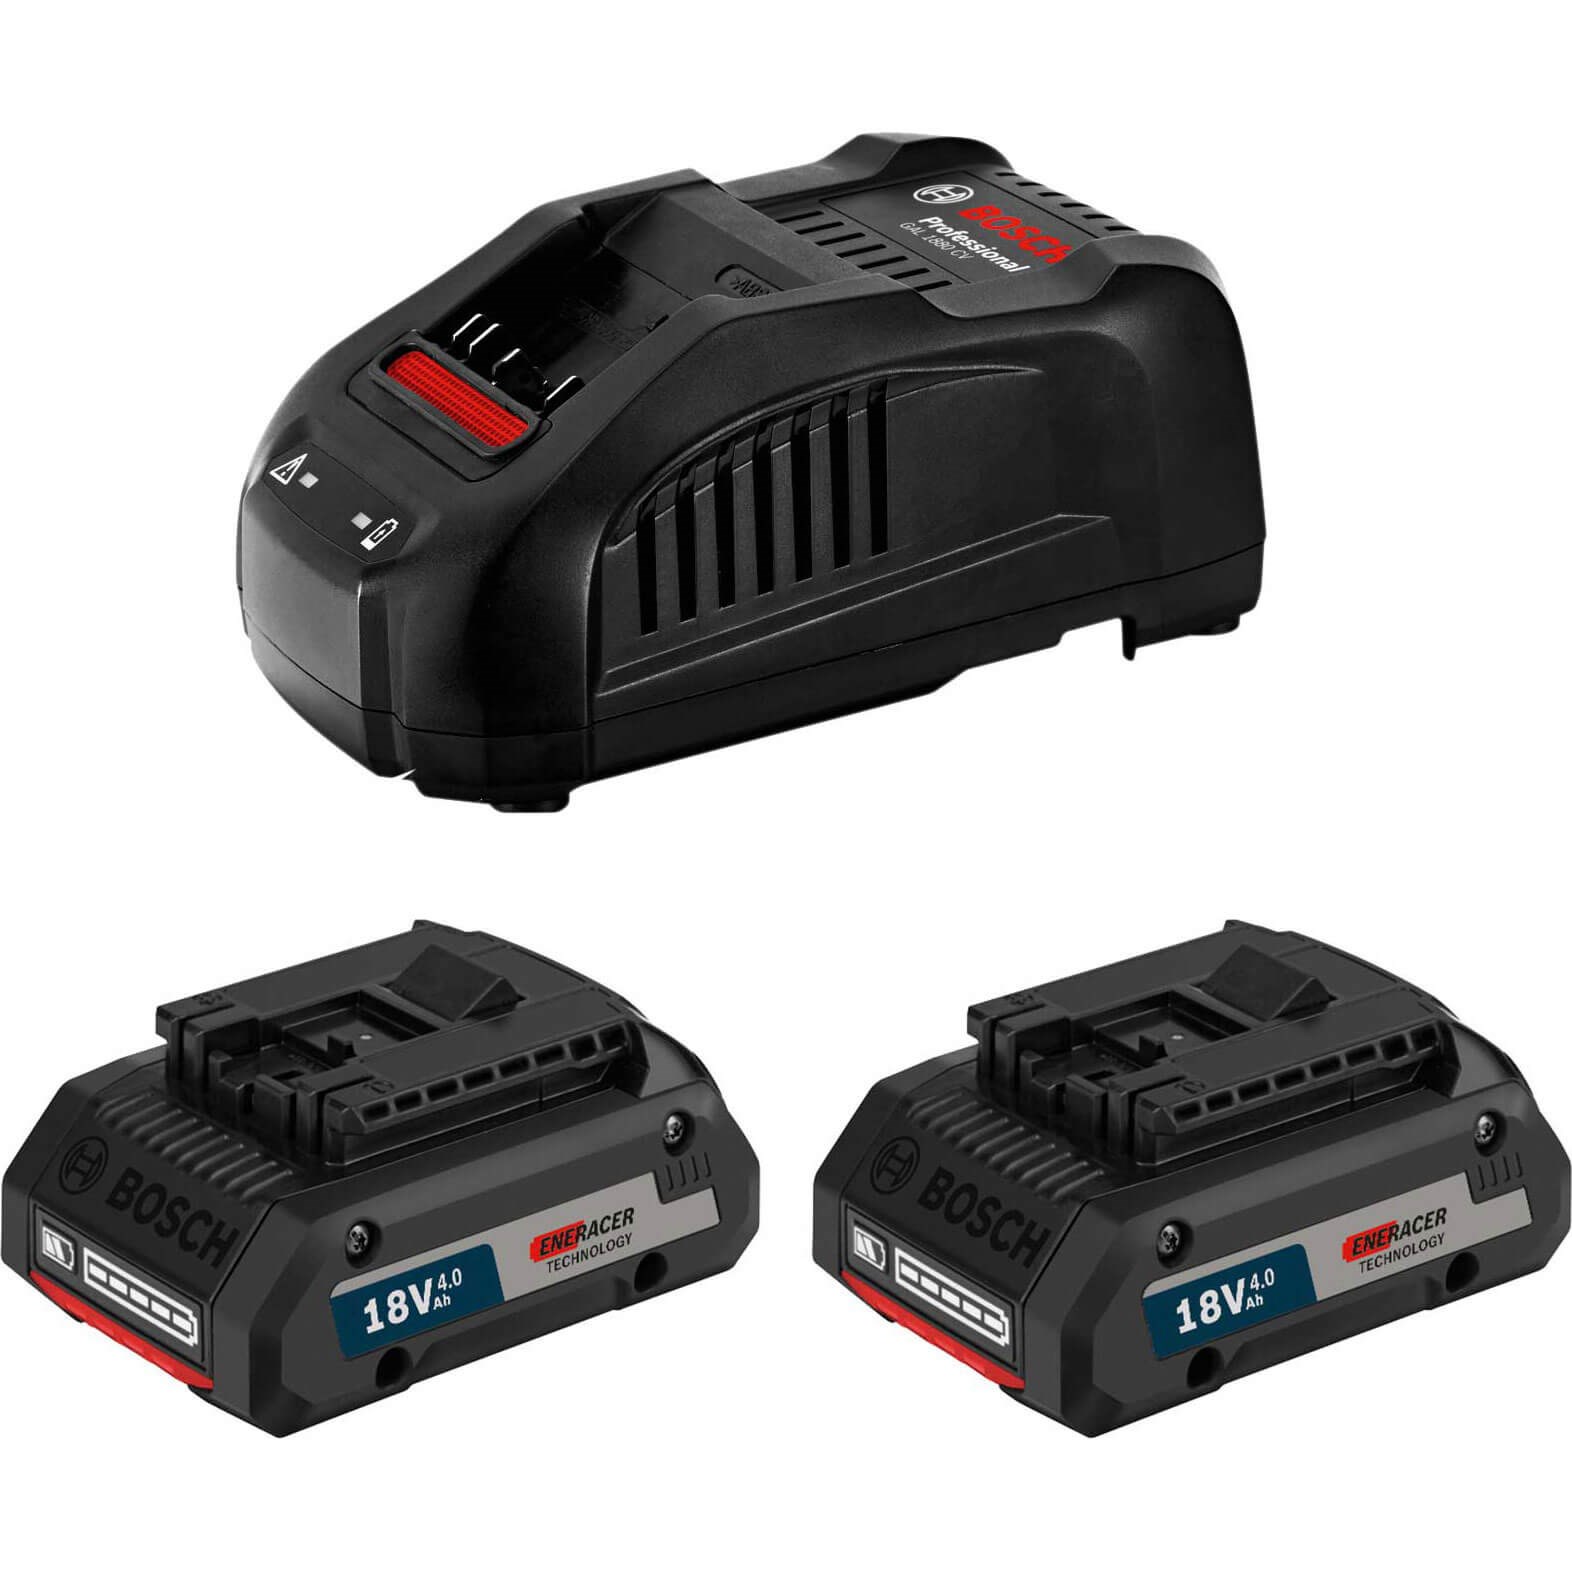 Bosch Genuine ProCORE 18v Cordless Li-ion Battery 4ah and Charger Kit